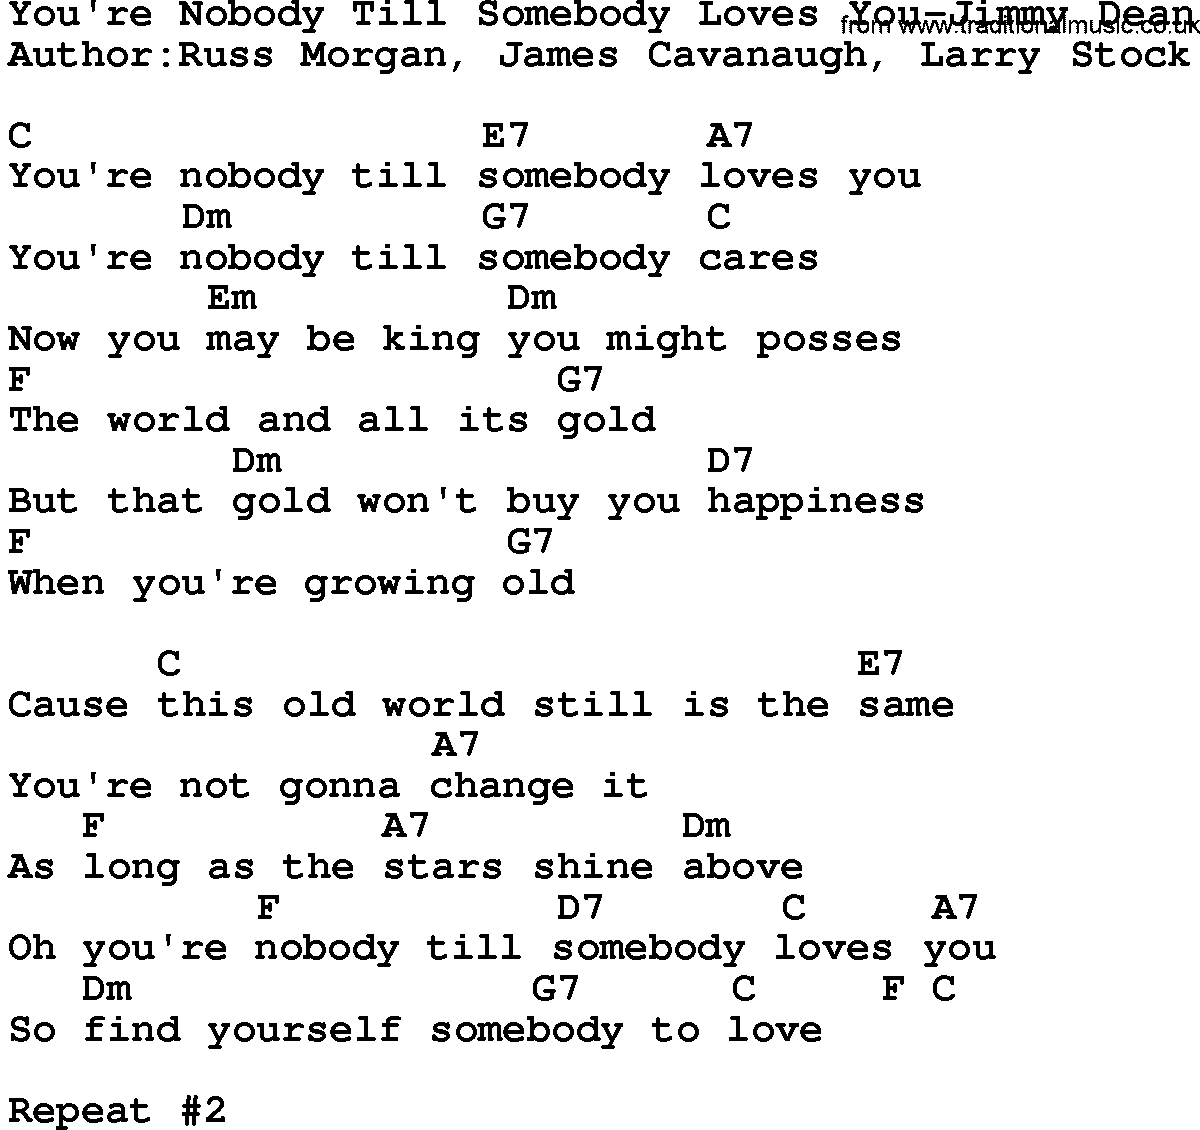 Country music song: You're Nobody Till Somebody Loves You-Jimmy Dean lyrics and chords